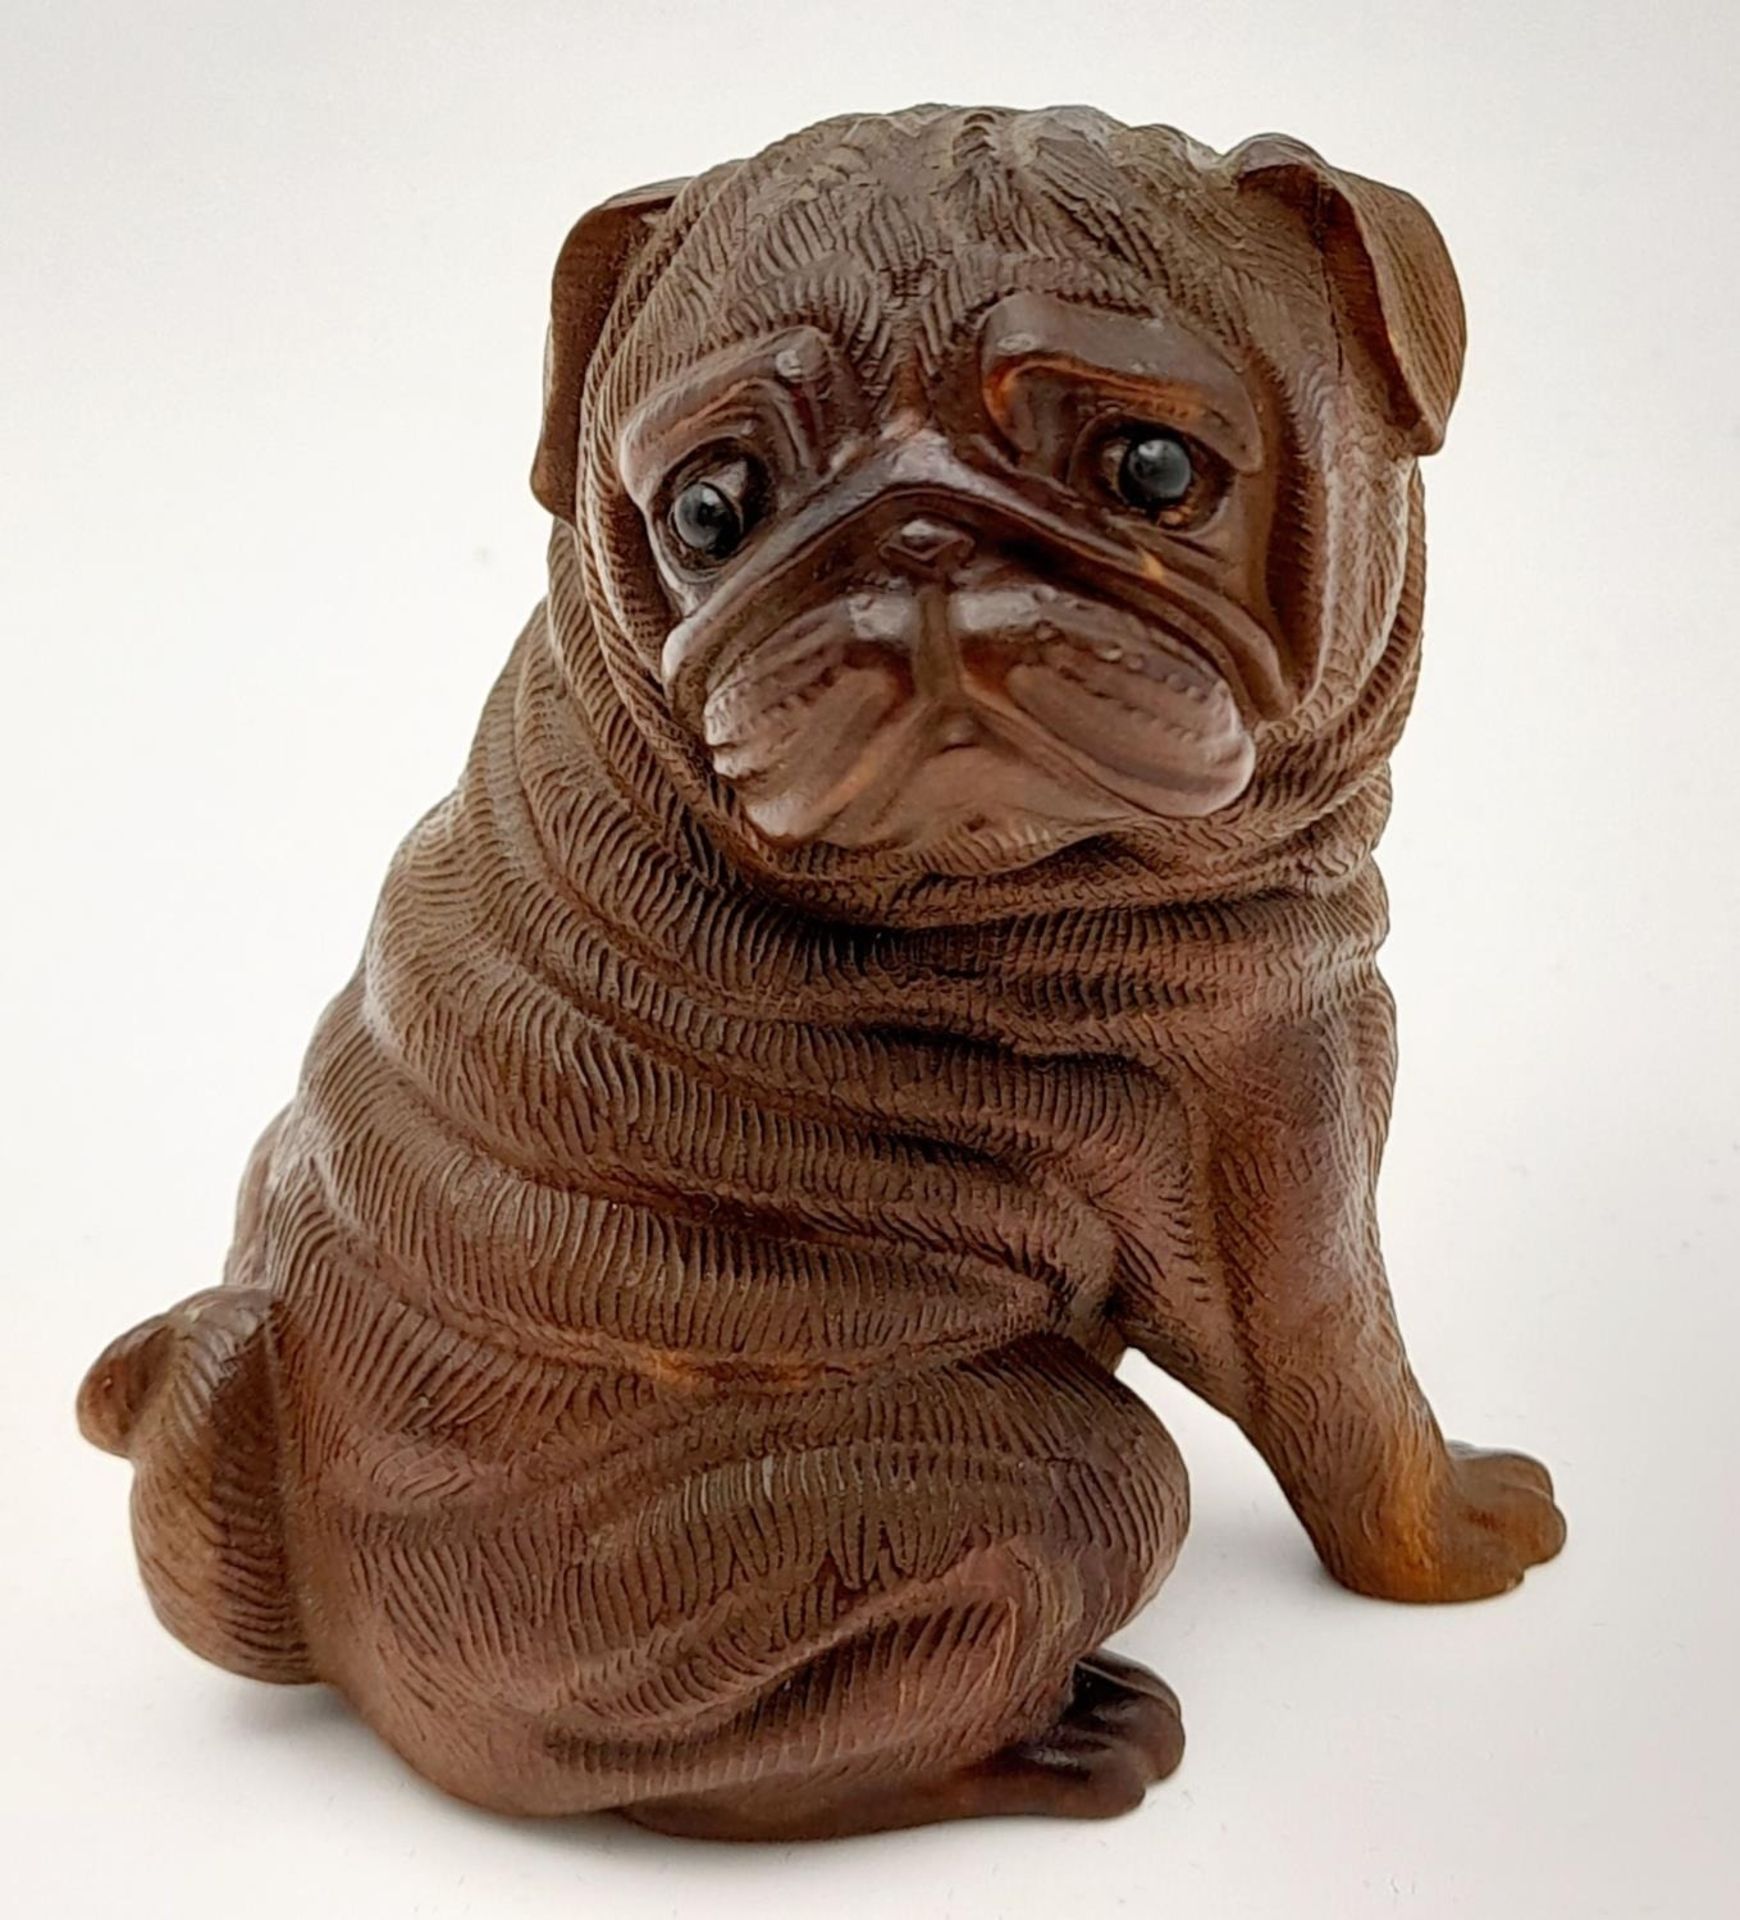 A very collectable, exquisitely hand carved on box wood Pug dog with amazing detail. Probably of